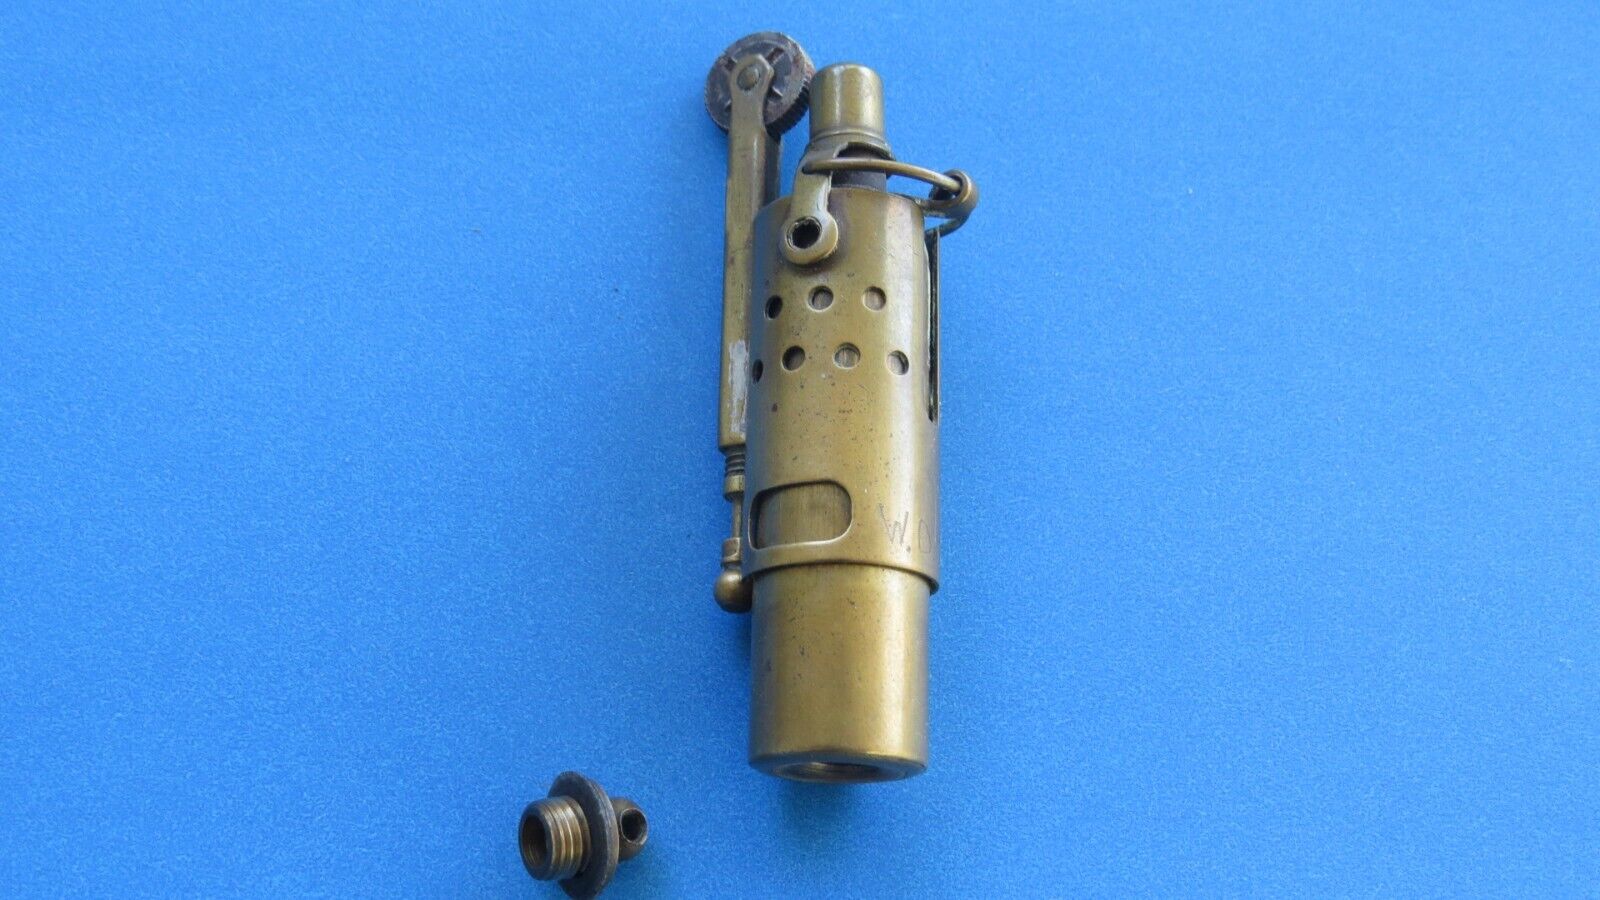 Antique WW1 Brass Trench cigarette lighter,  Excellent condition, No markings